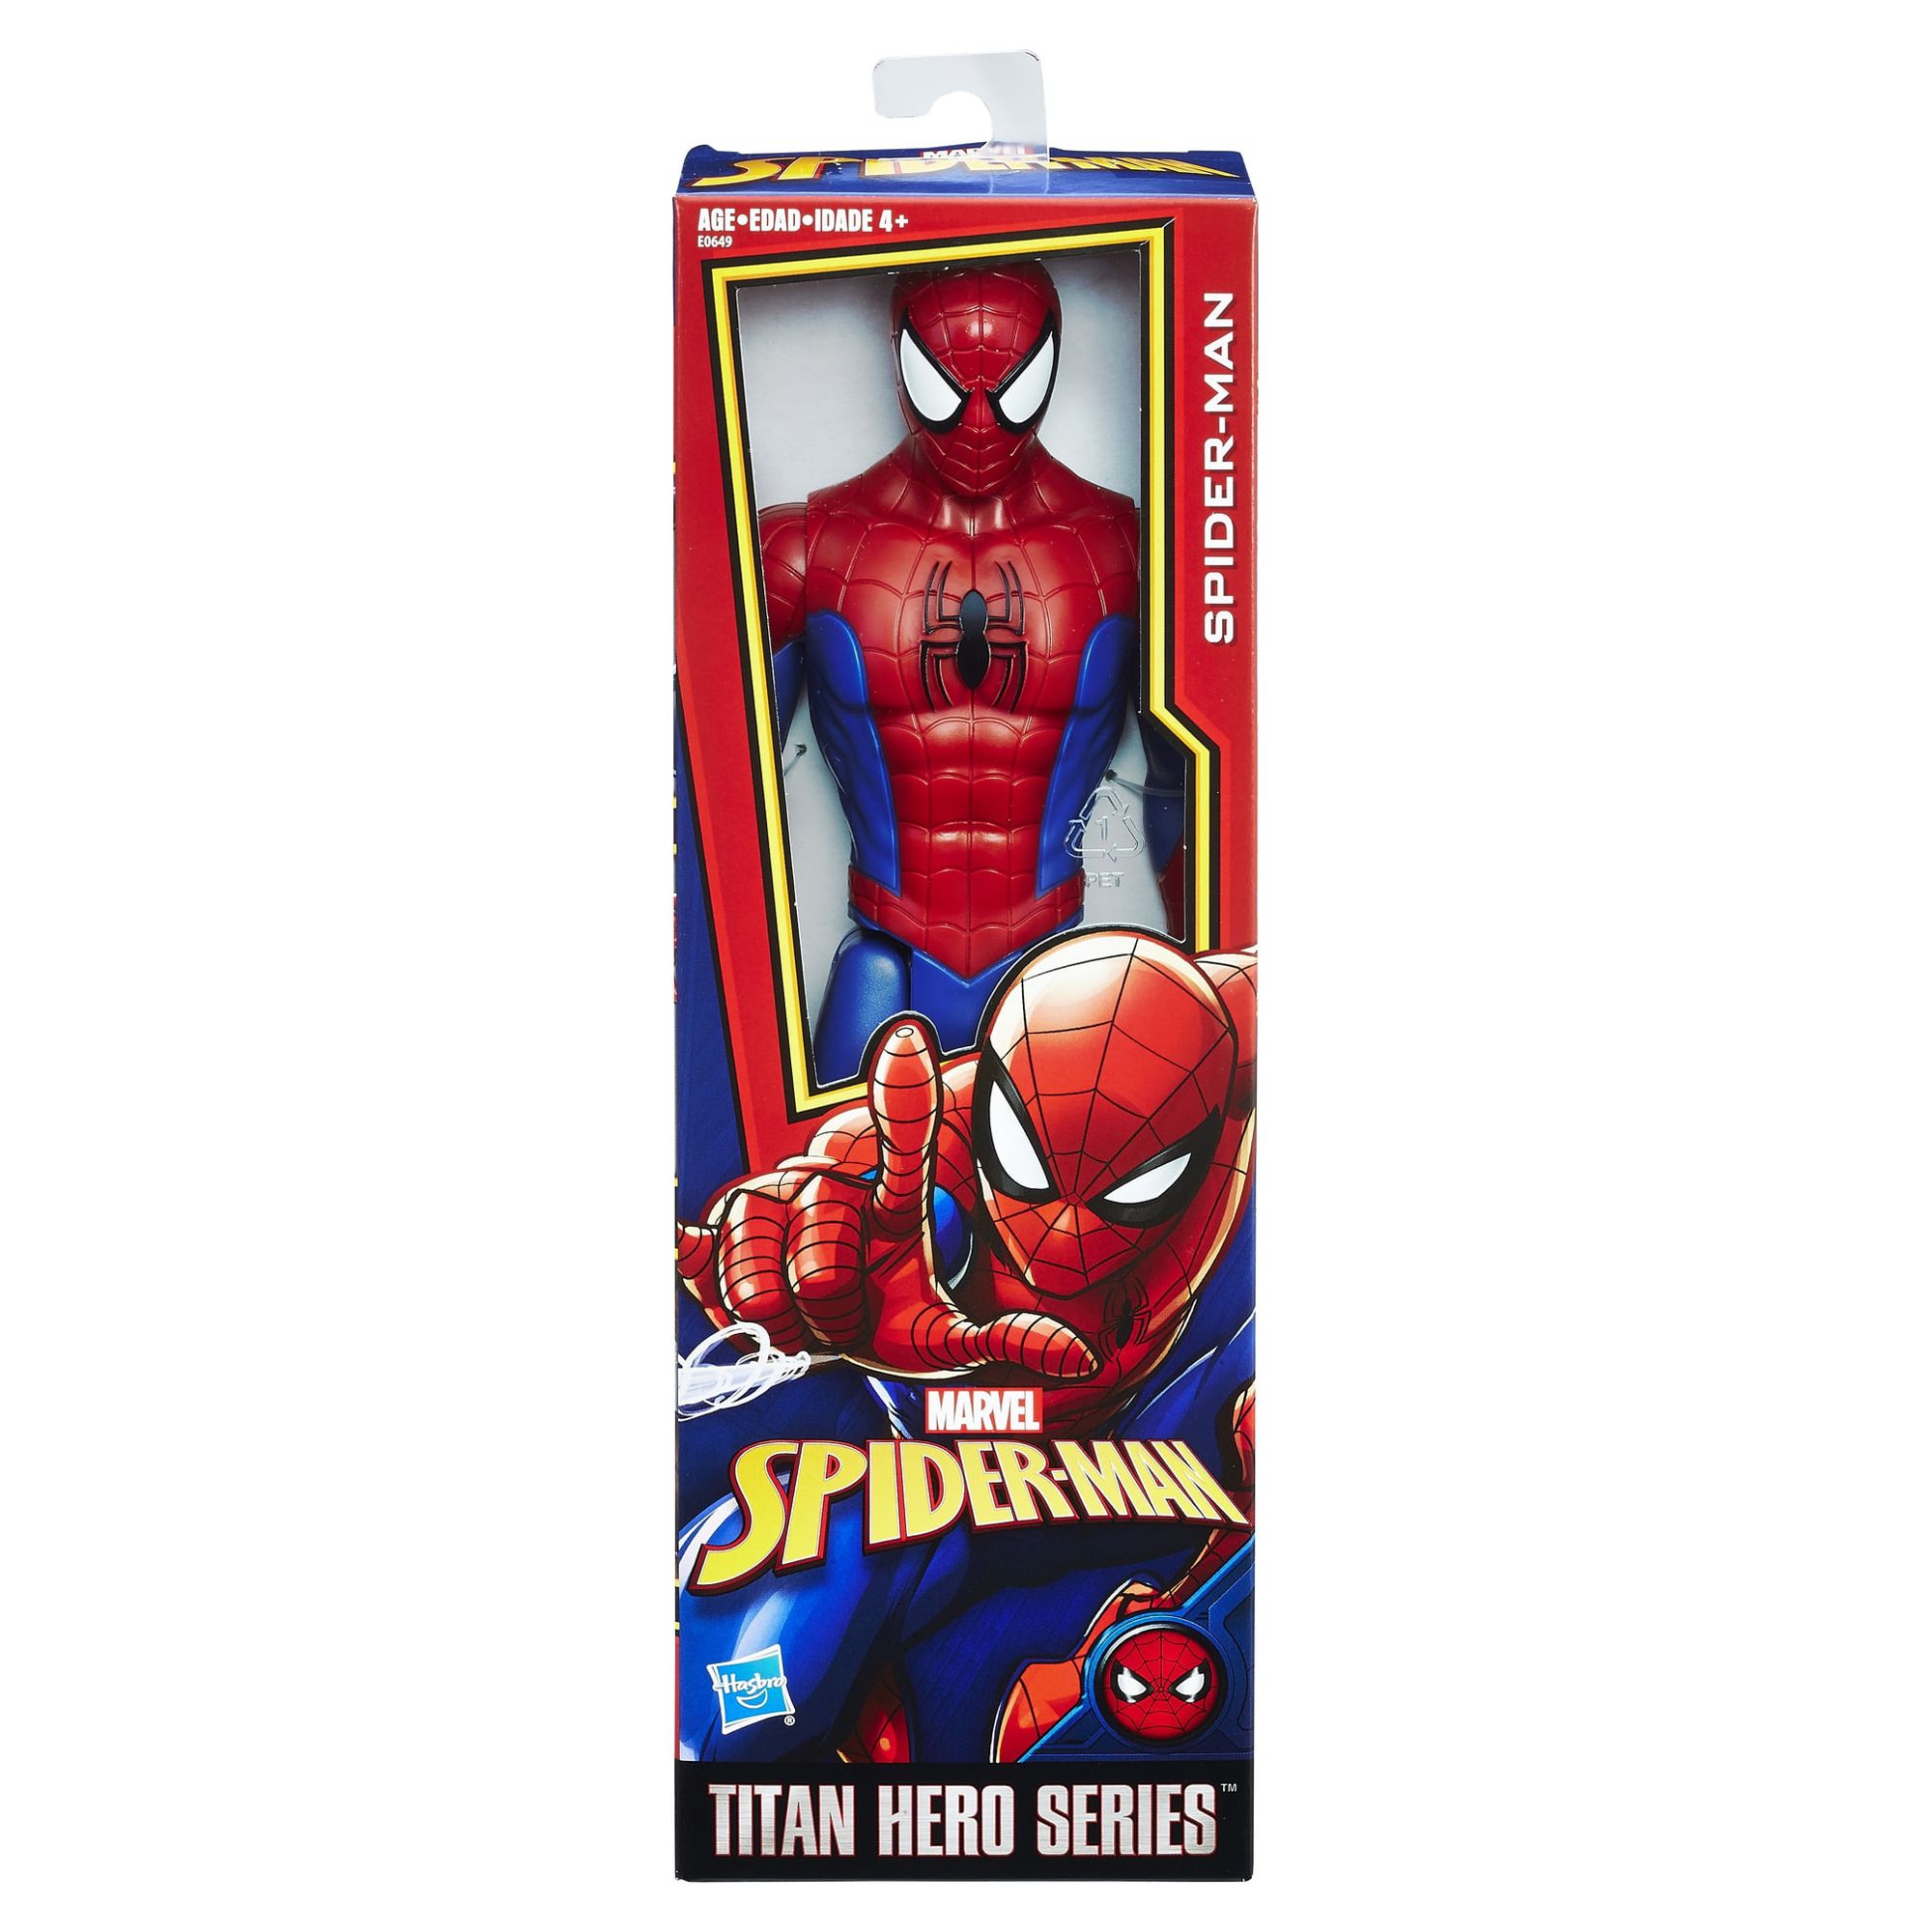 Marvel Spiderman: Titan Hero Series Spiderman Kids Toy Action Figure for Boys and Girls (13”) - image 2 of 16